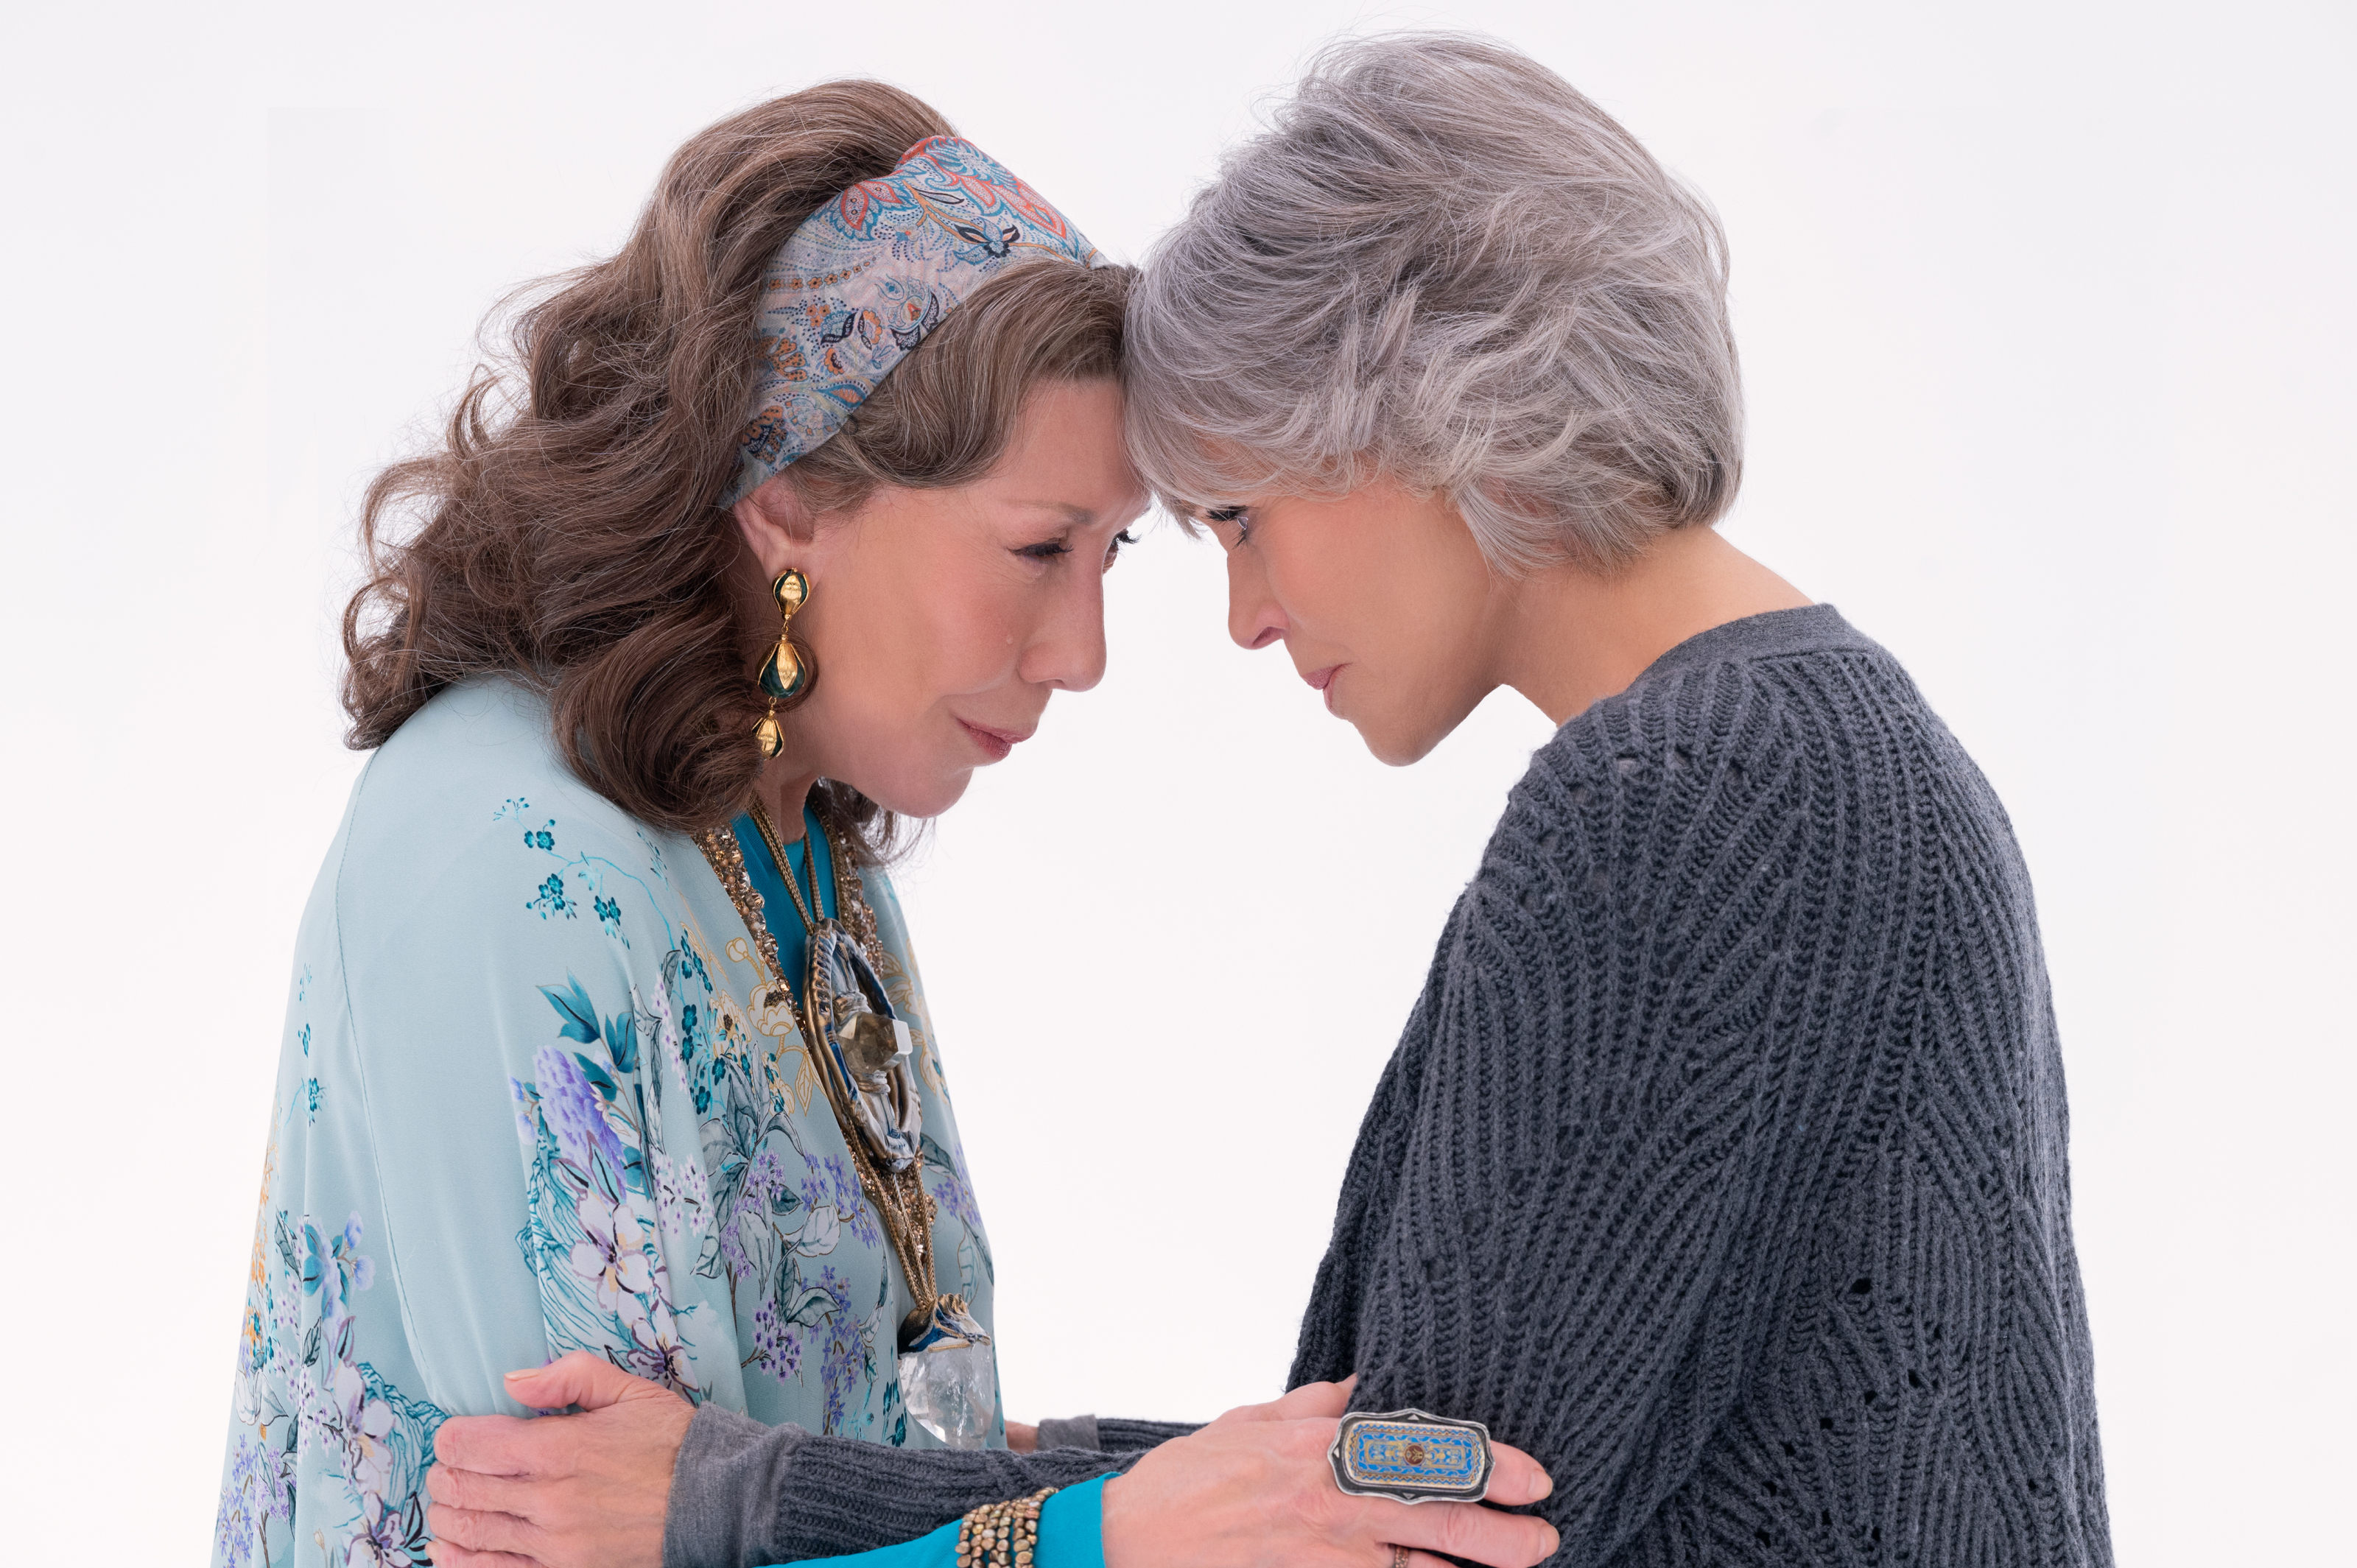 What time does Grace and Frankie season 7B come out? (where you live)